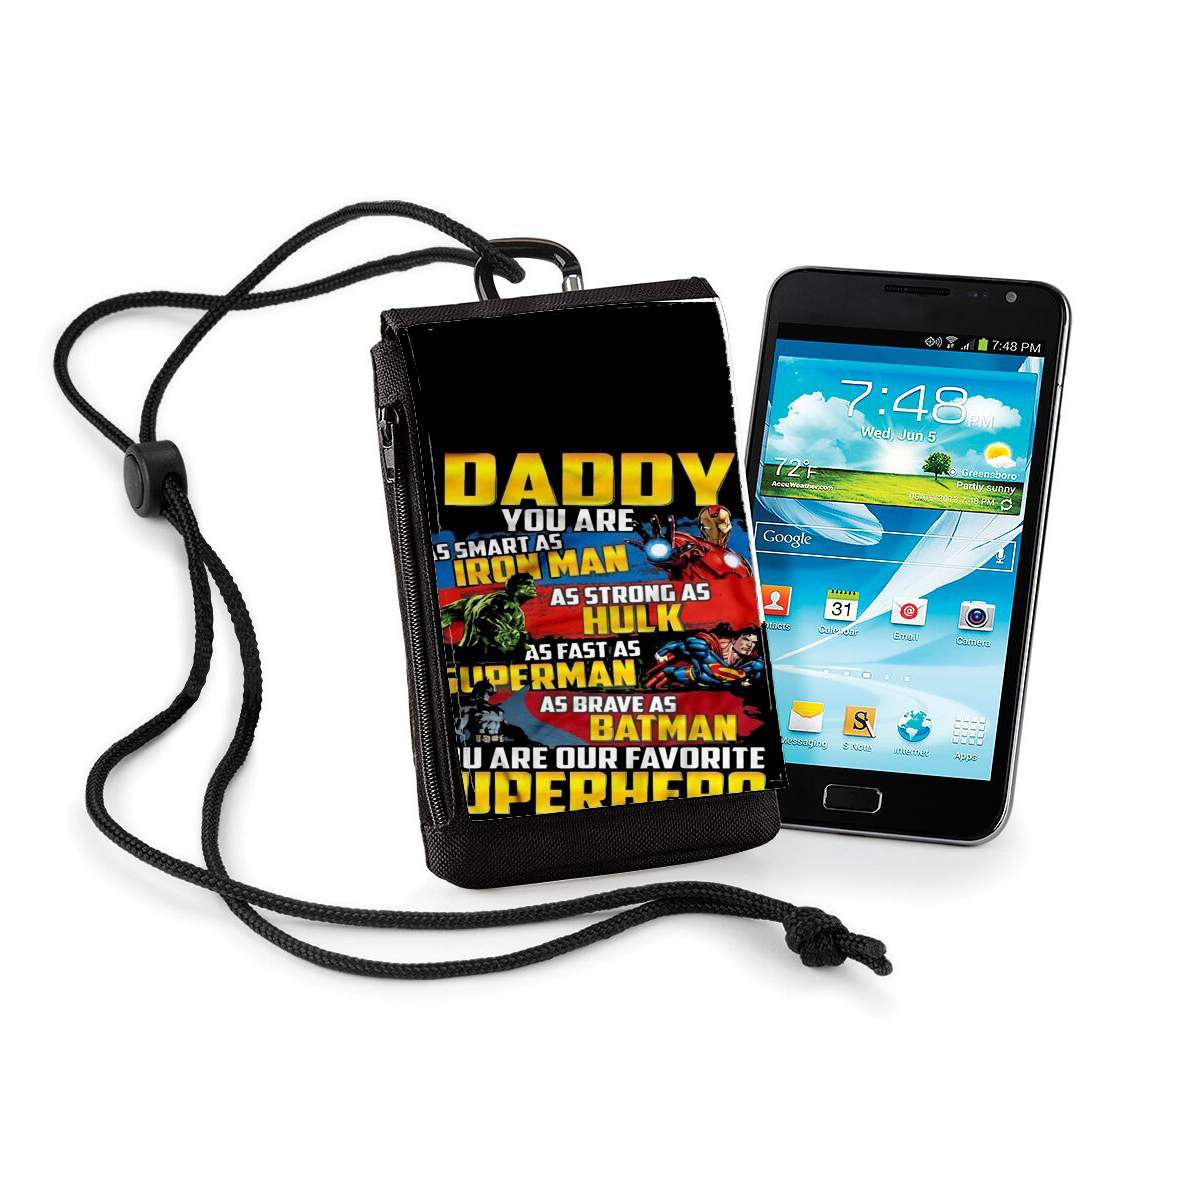 Pochette de téléphone - Taille normal pour Daddy You are as smart as iron man as strong as Hulk as fast as superman as brave as batman you are my superhero